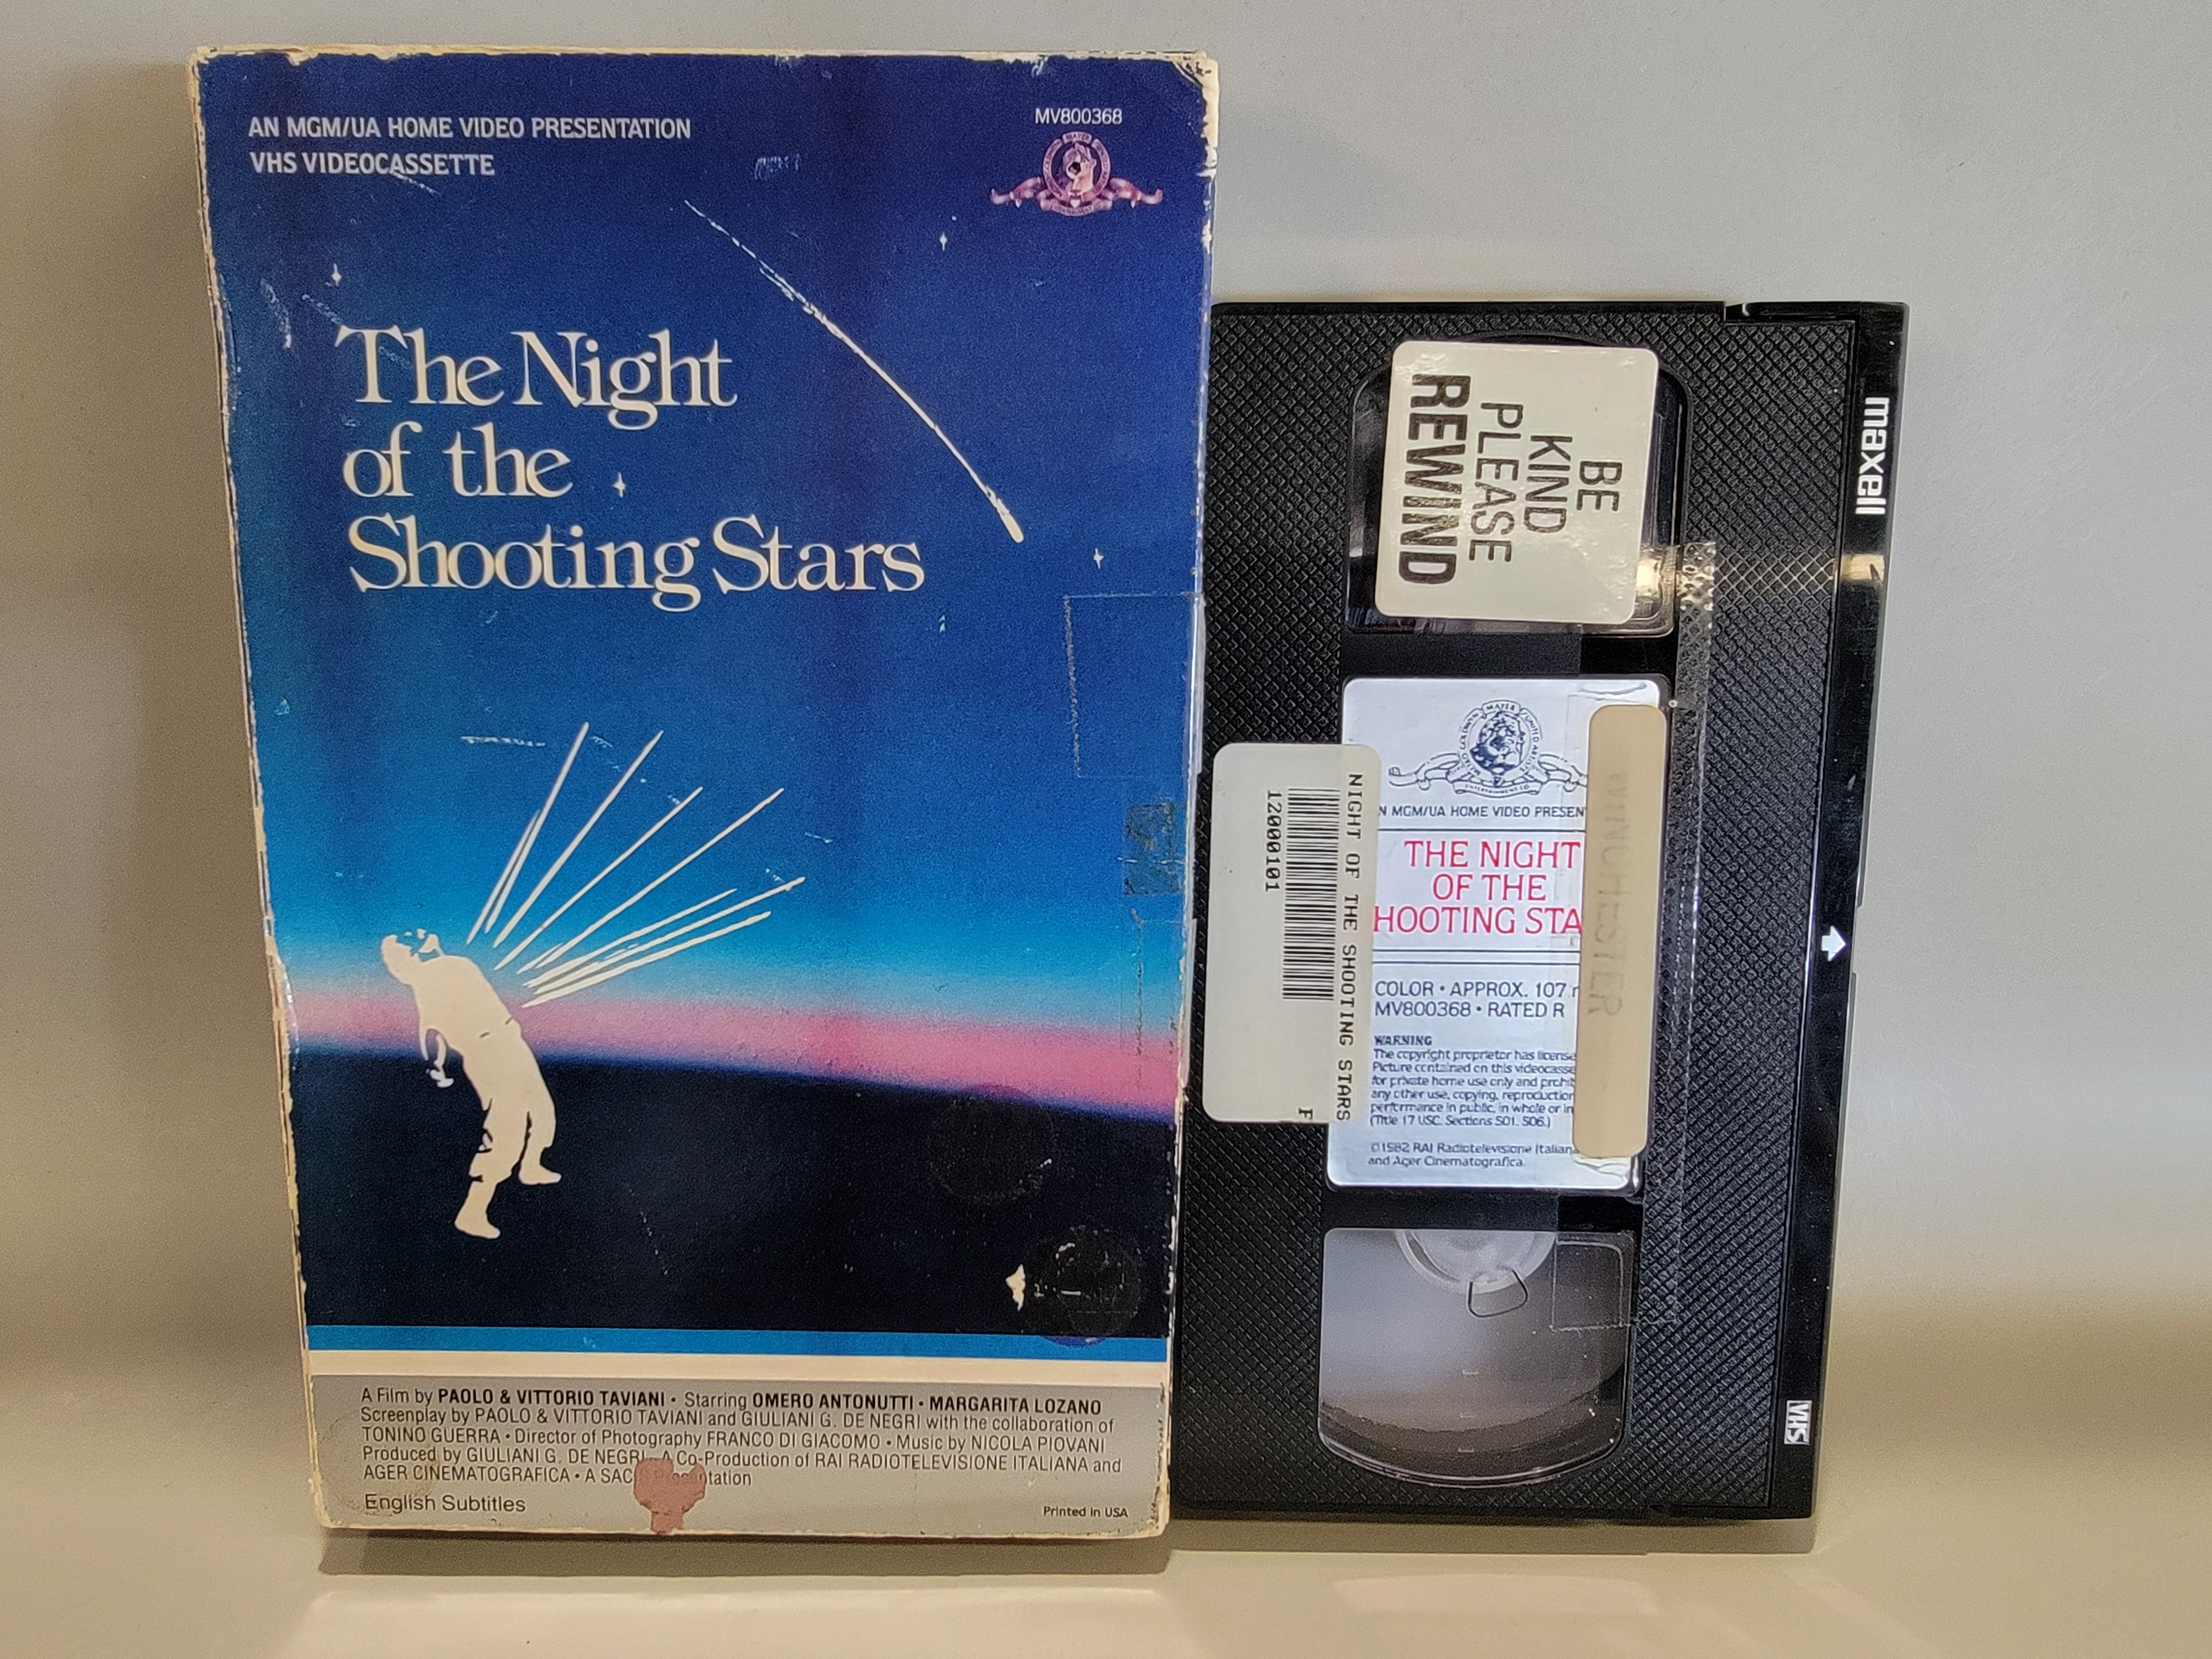 THE NIGHT OF THE SHOOTING STARS VHS [USED]